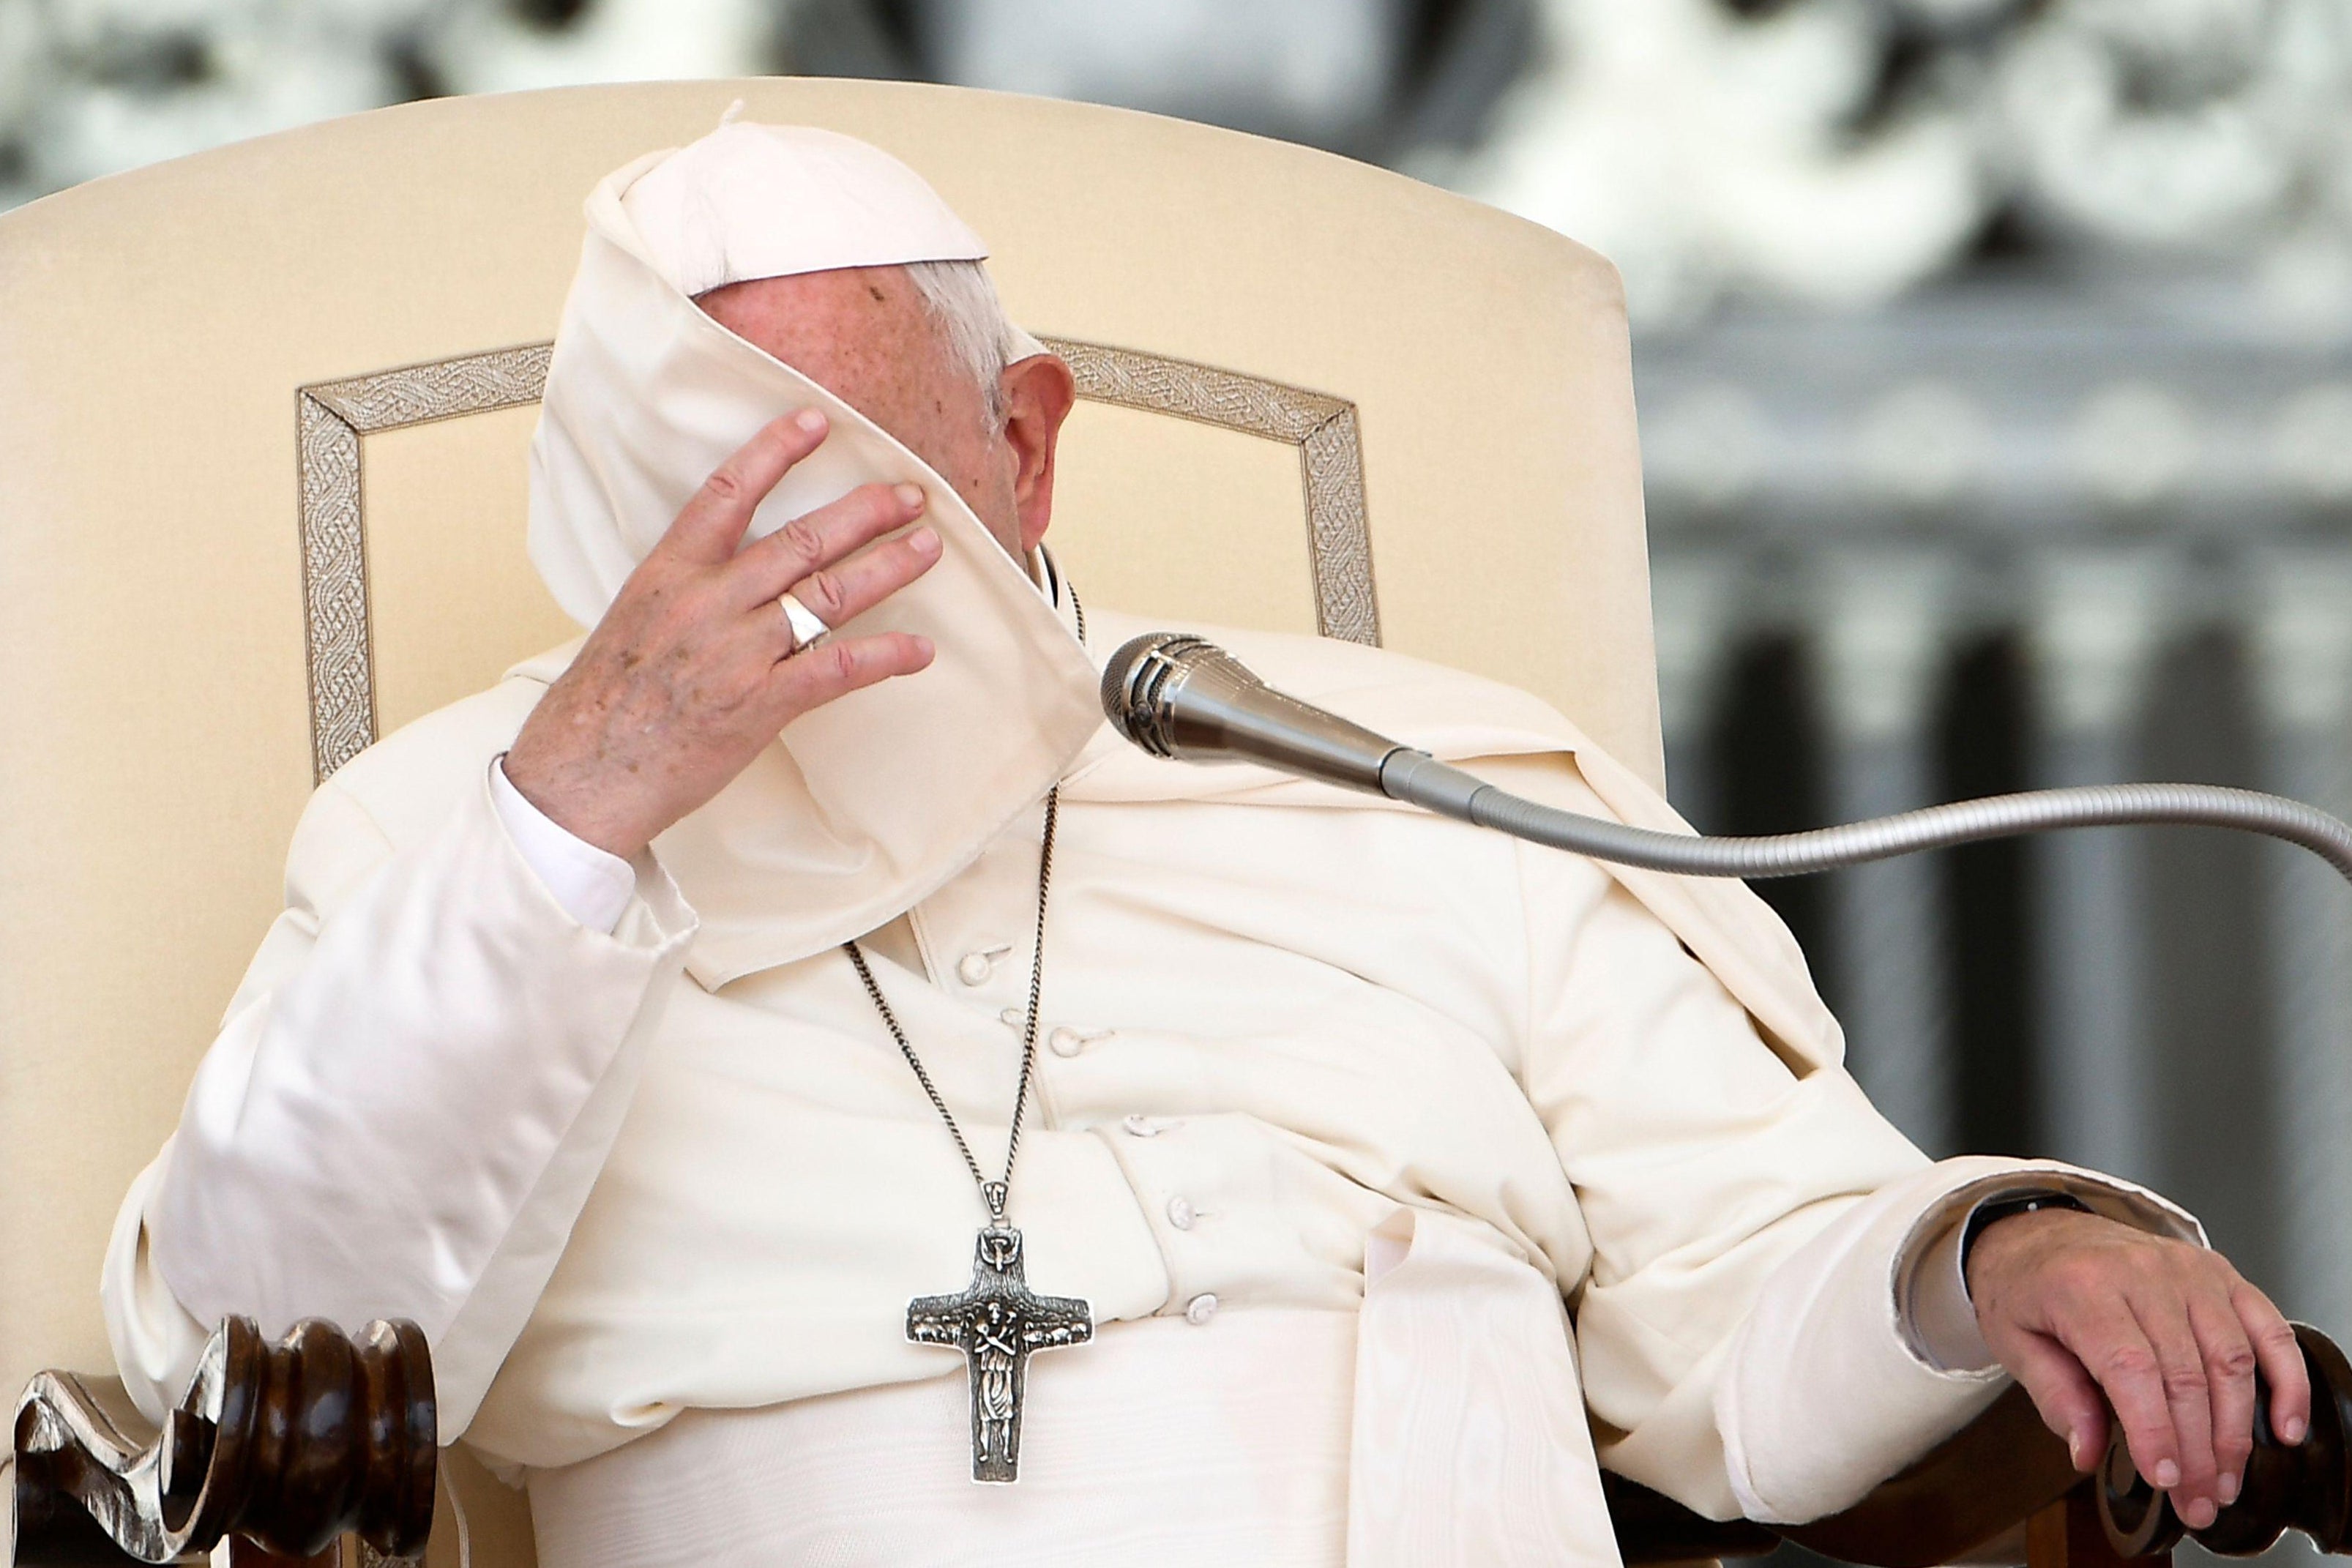 Pope Francis' reaches his hand up as the corner of his cape pellegrina covers his face while he sits in a chair.